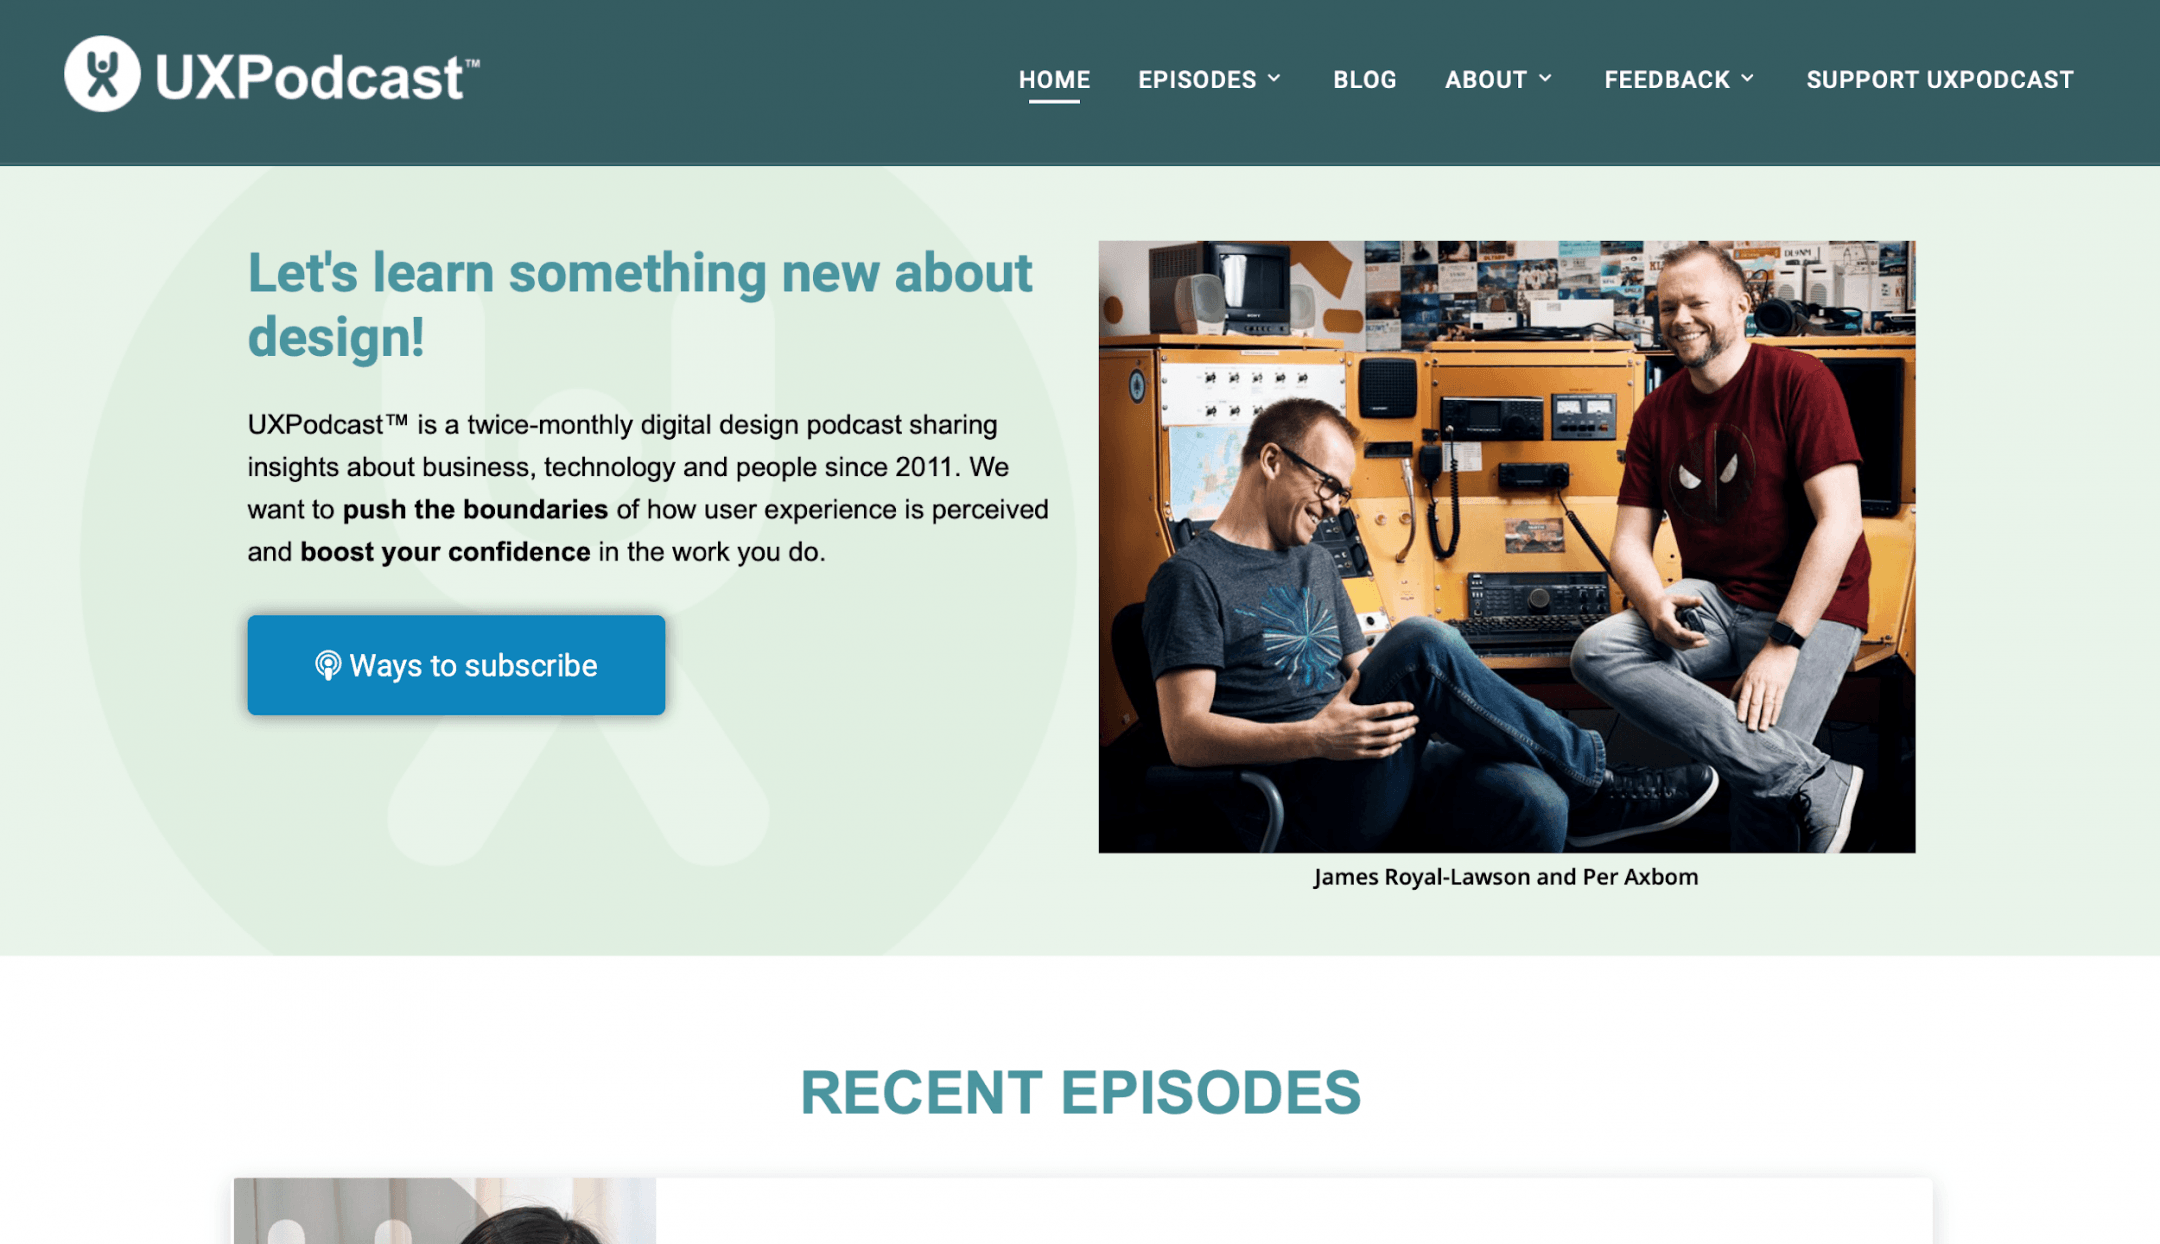 A screenshot of the UXPodcast homepage